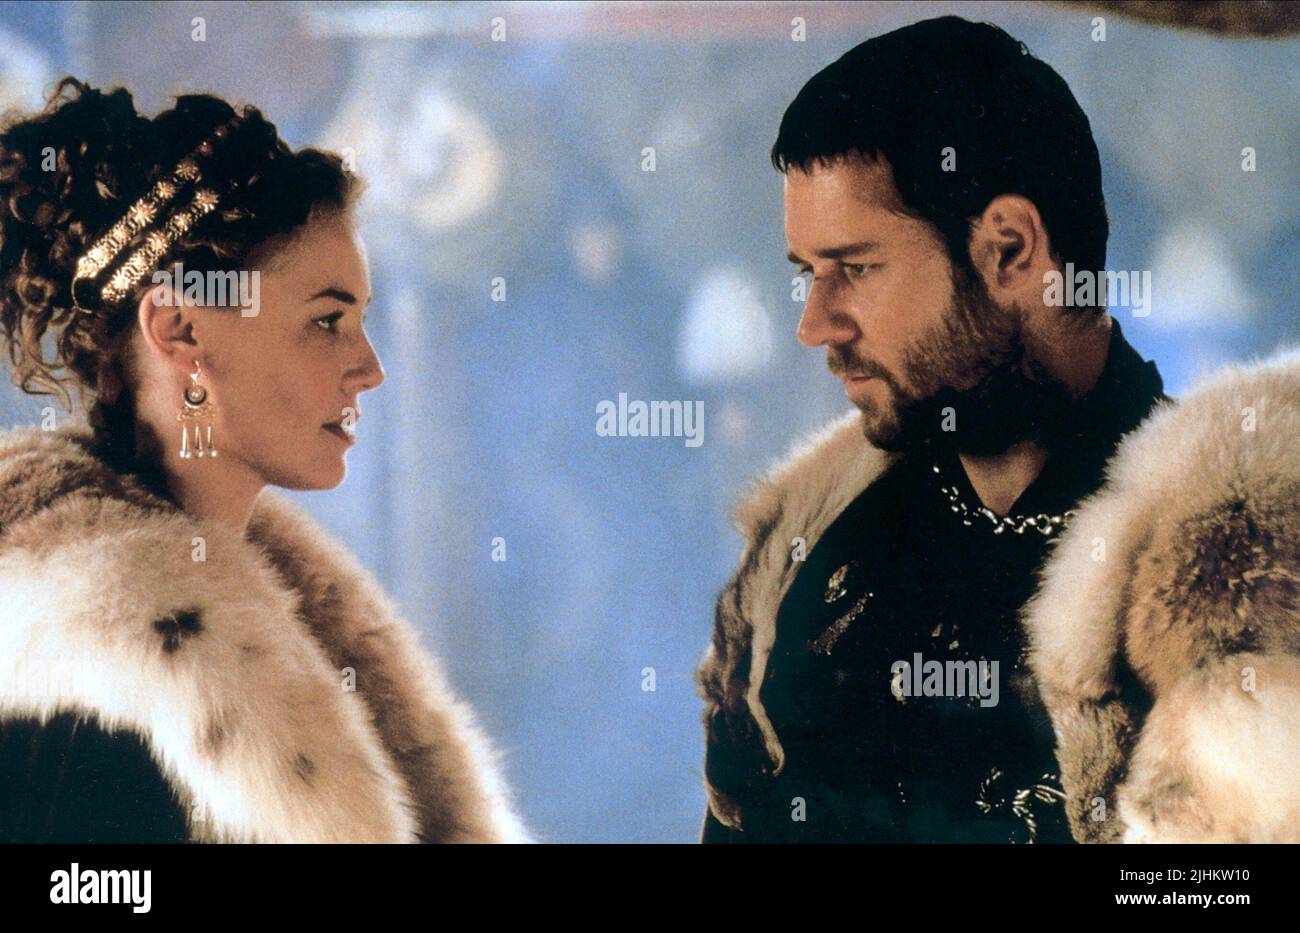 CONNIE NIELSEN, RUSSELL CROWE, GLADIATOR, 2000 Stock Photo